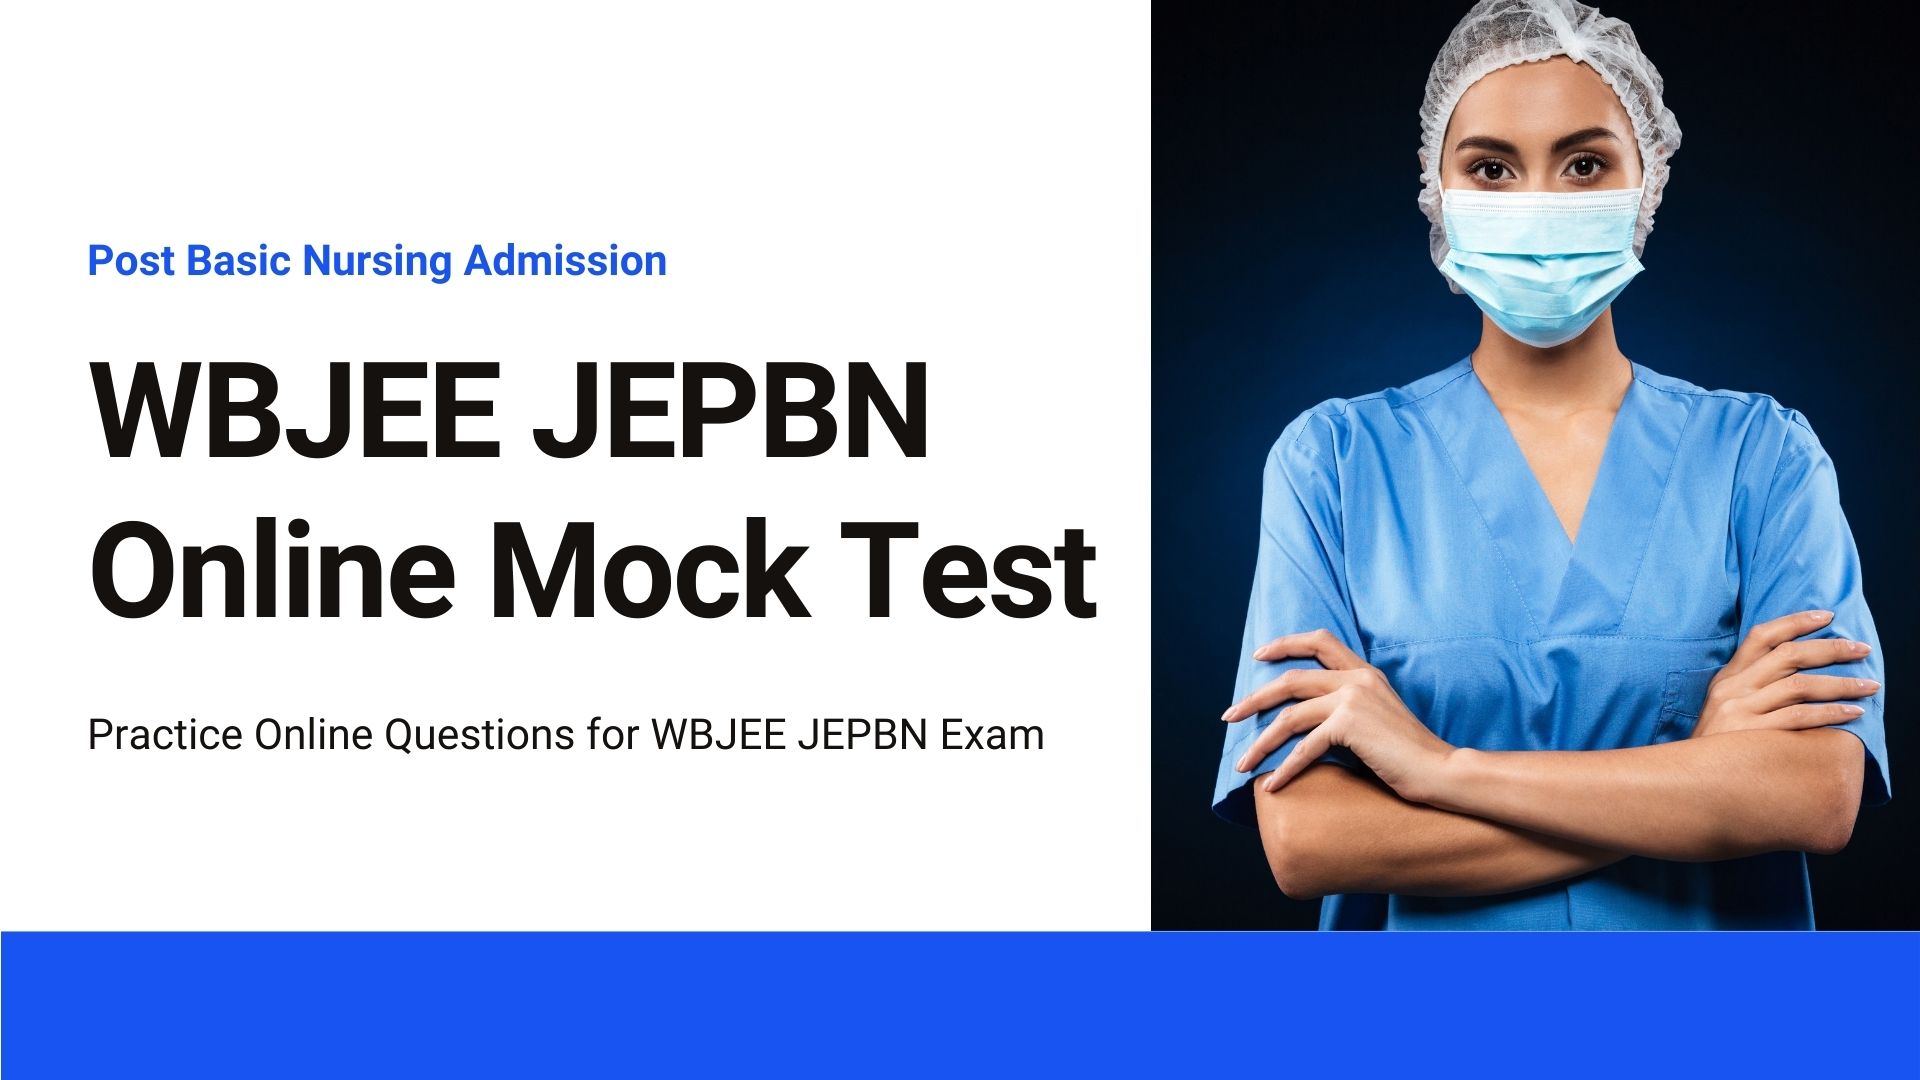 WBJEE JEPBN Online Mock Test Question Papers